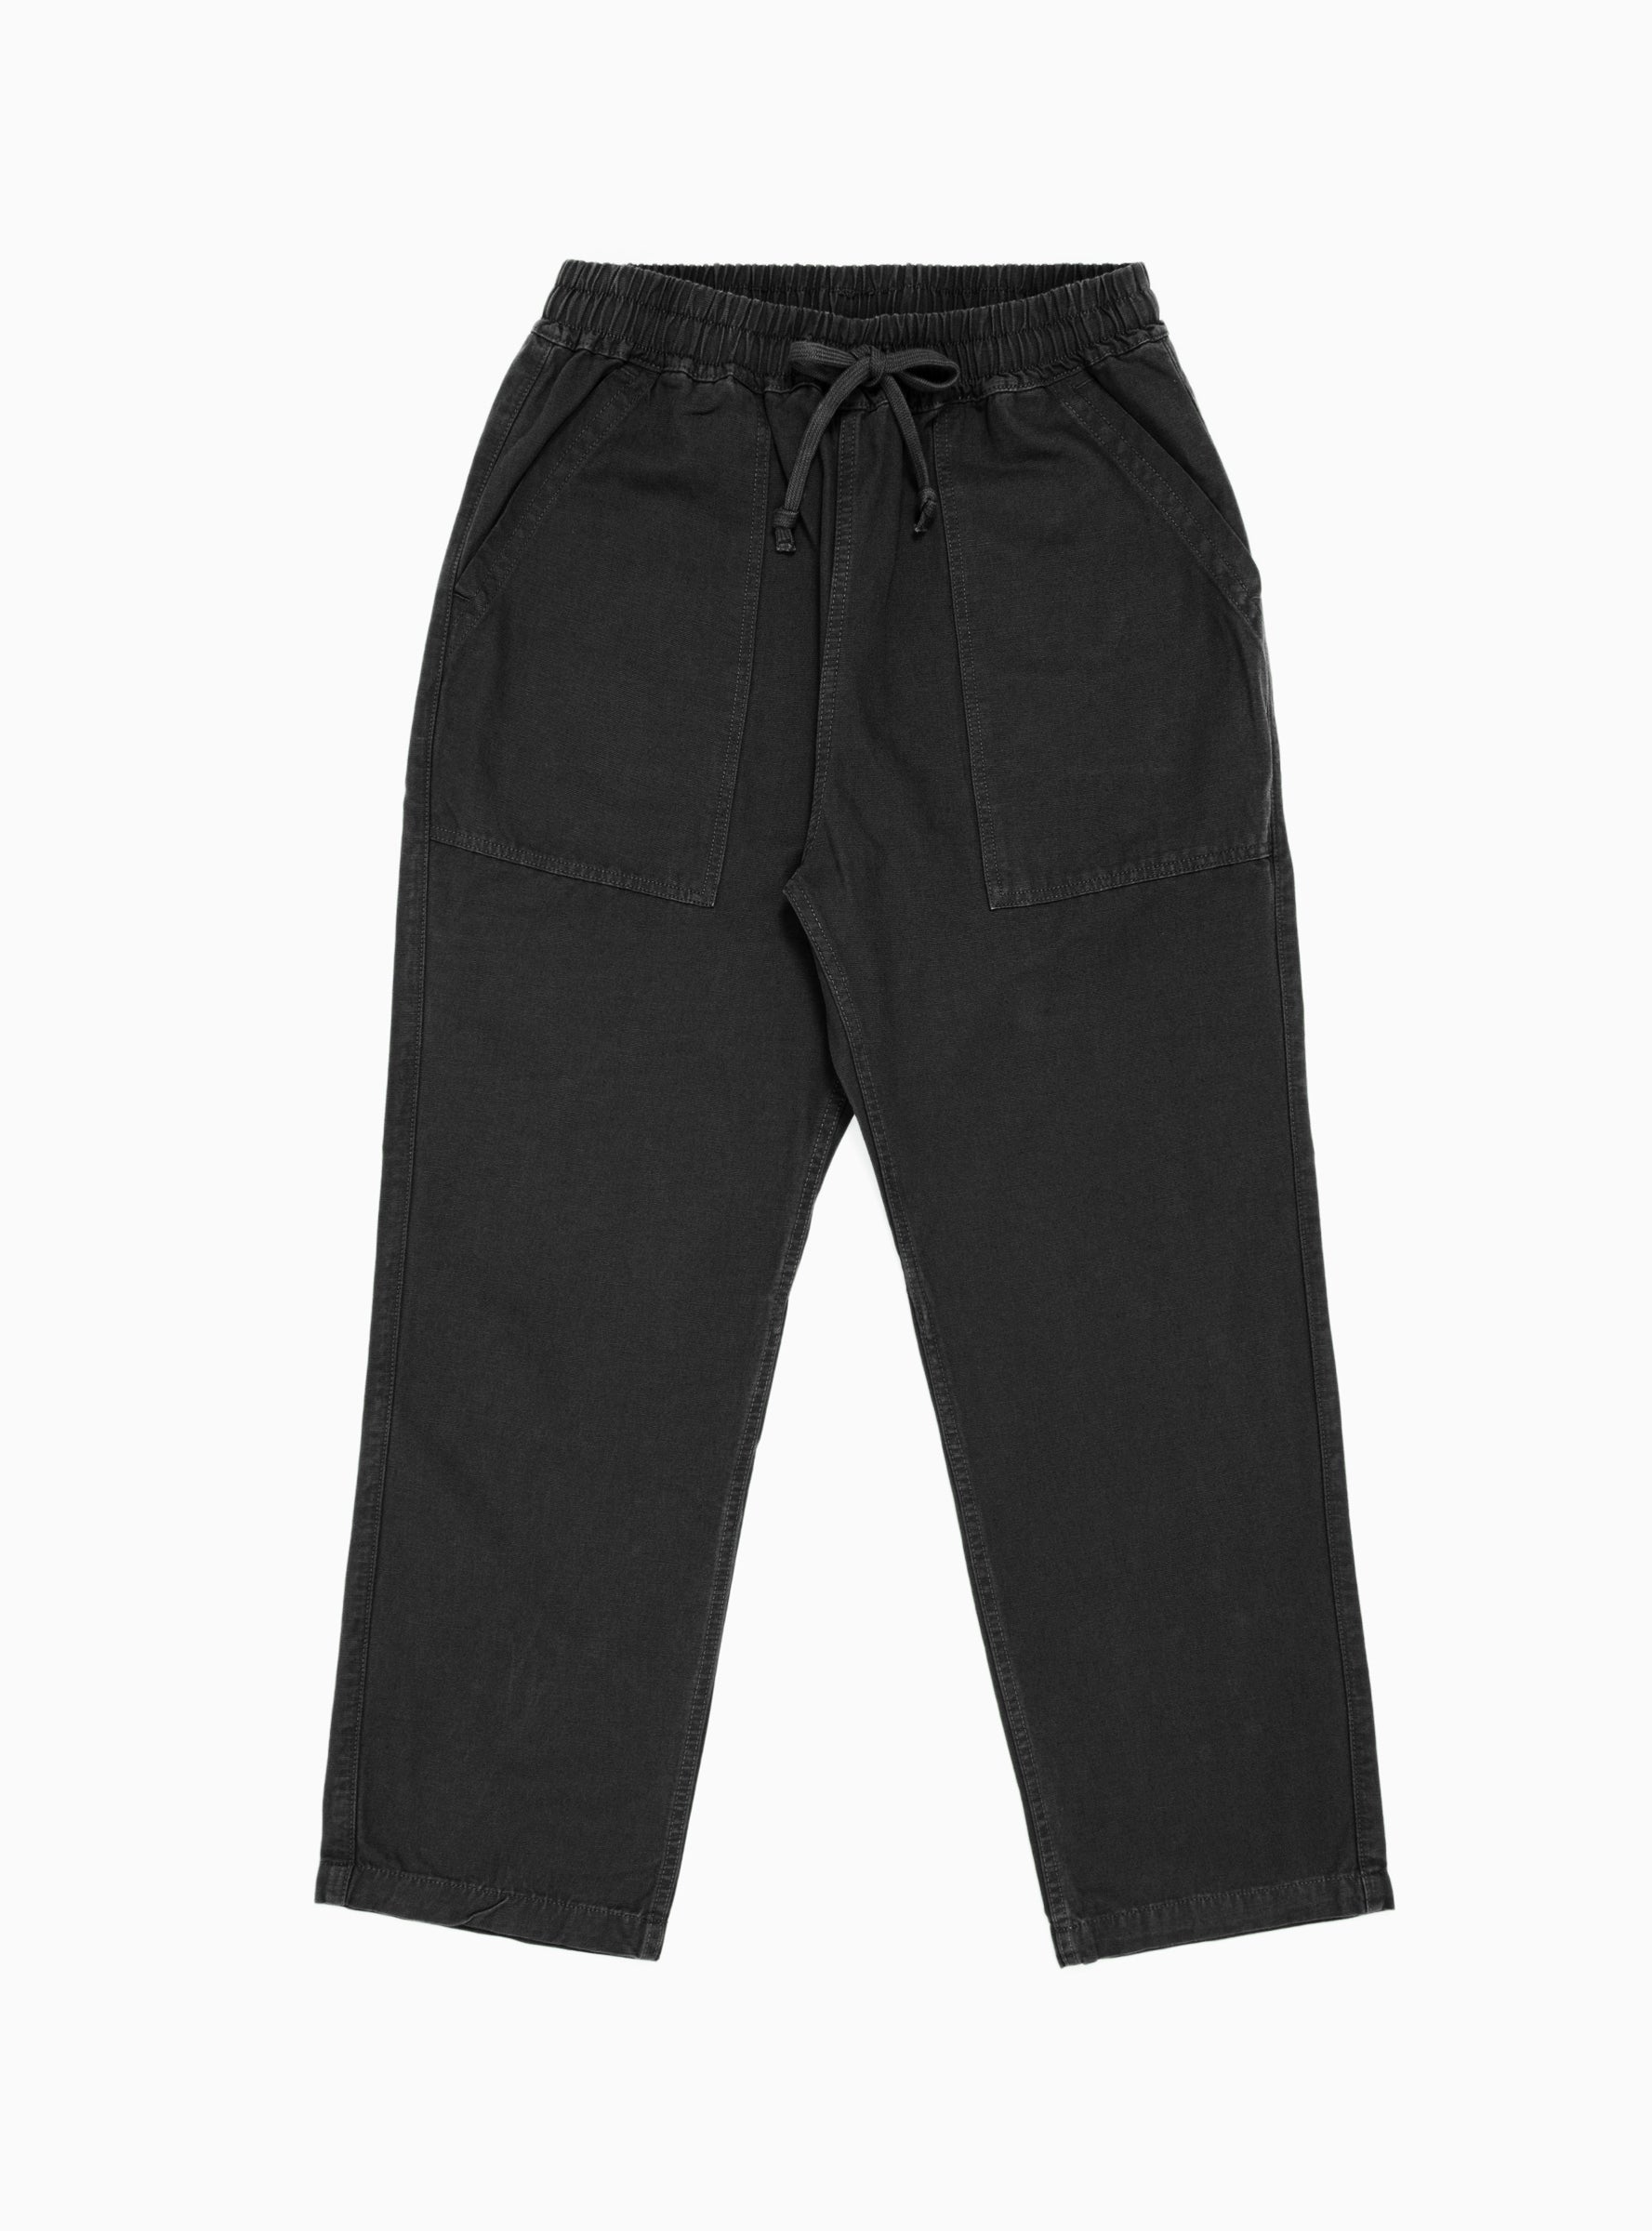 Service Works Service Works Classic Chef Trousers Black - Size: Large